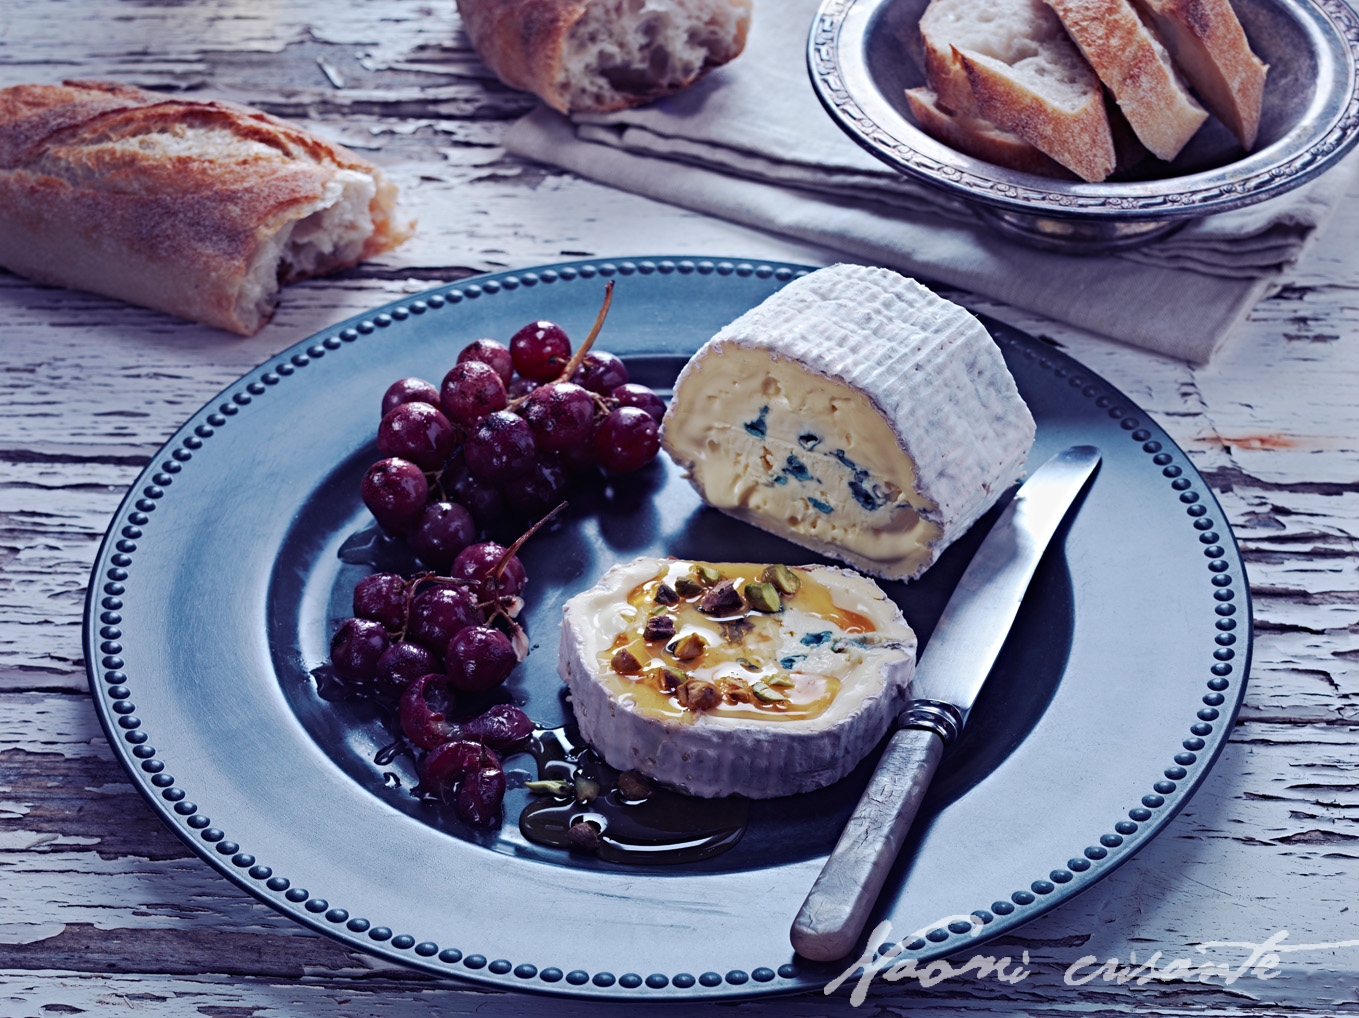 12084879-0096-triple_cream_blue_with_honeyed_pistachios_and_roasted_grapes